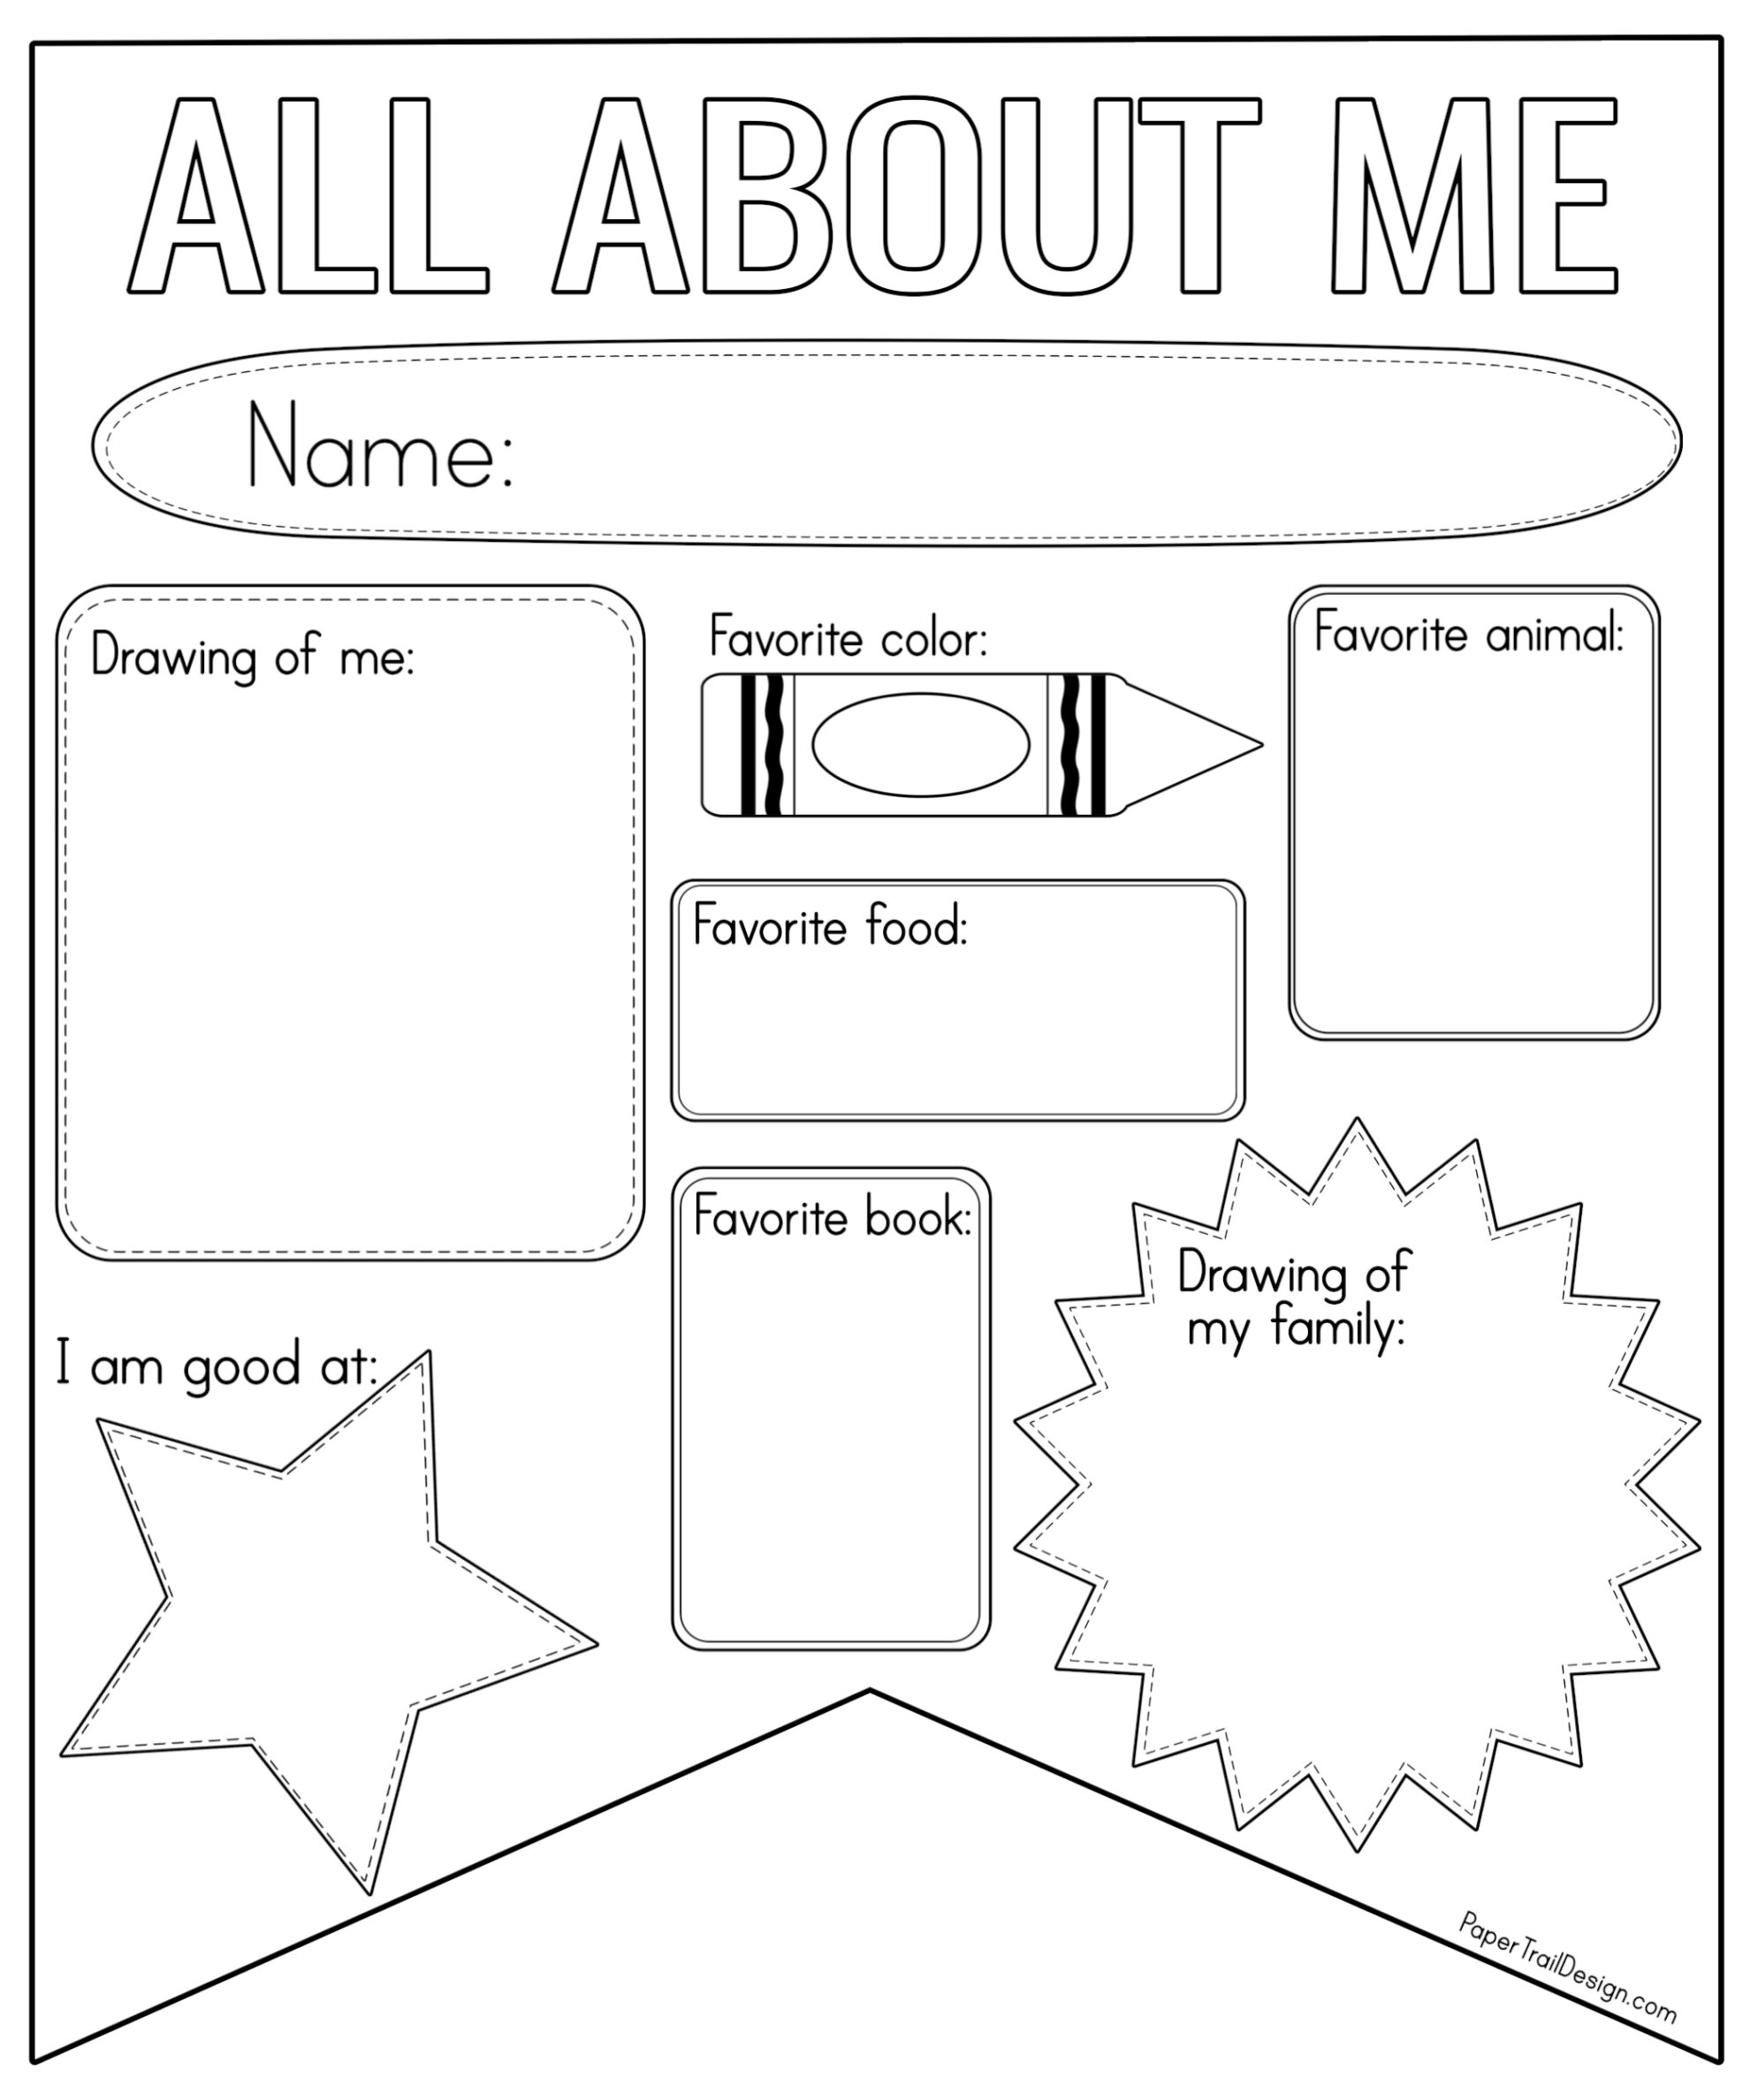 All About Me Worksheet Printable  Paper Trail Design Pertaining To All About Me Worksheet Preschool